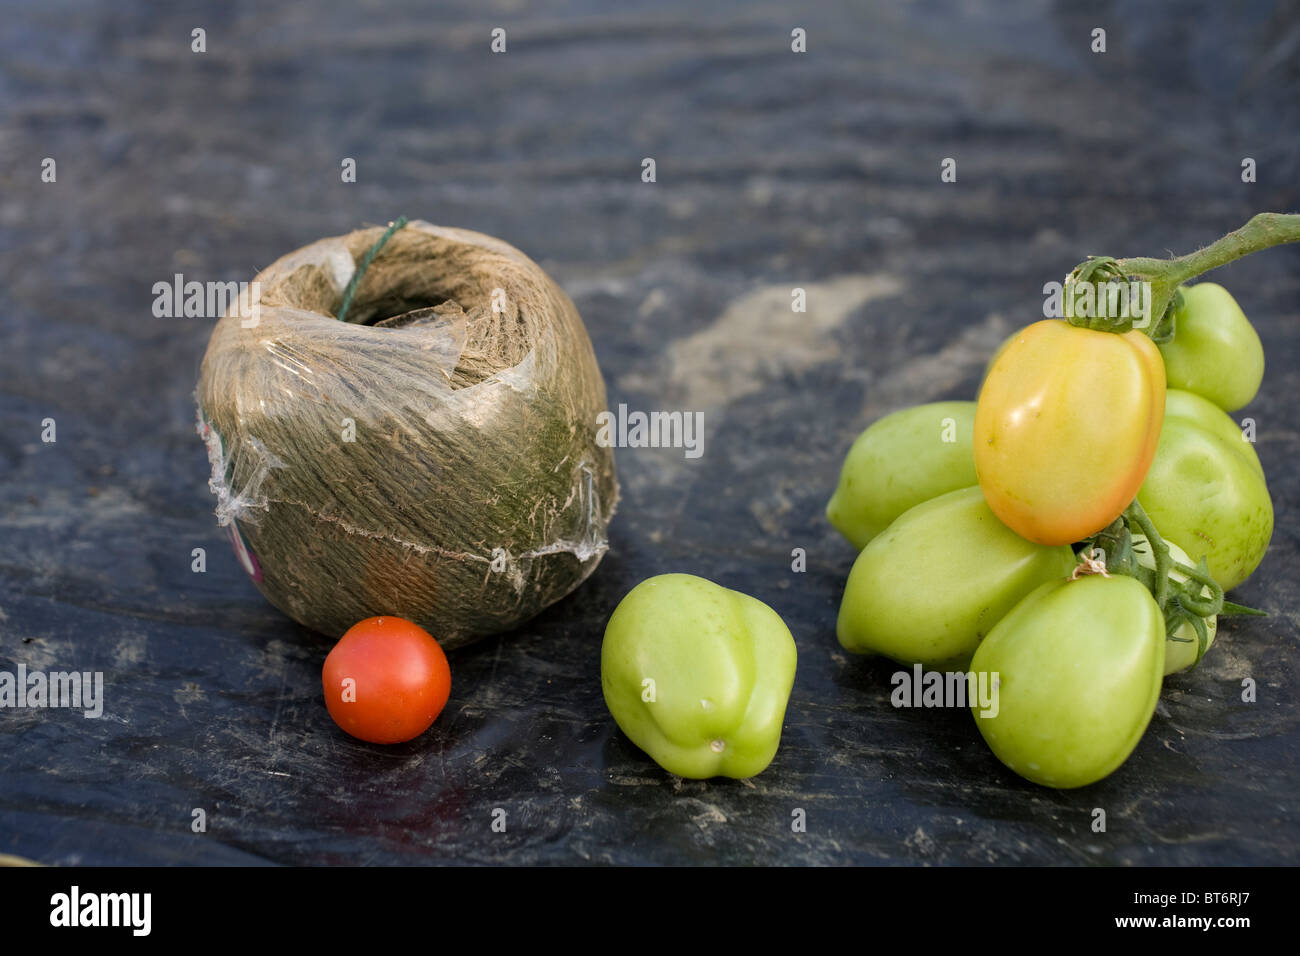 A ball of garden twine beside some home grown unripe tomatoes Stock Photo